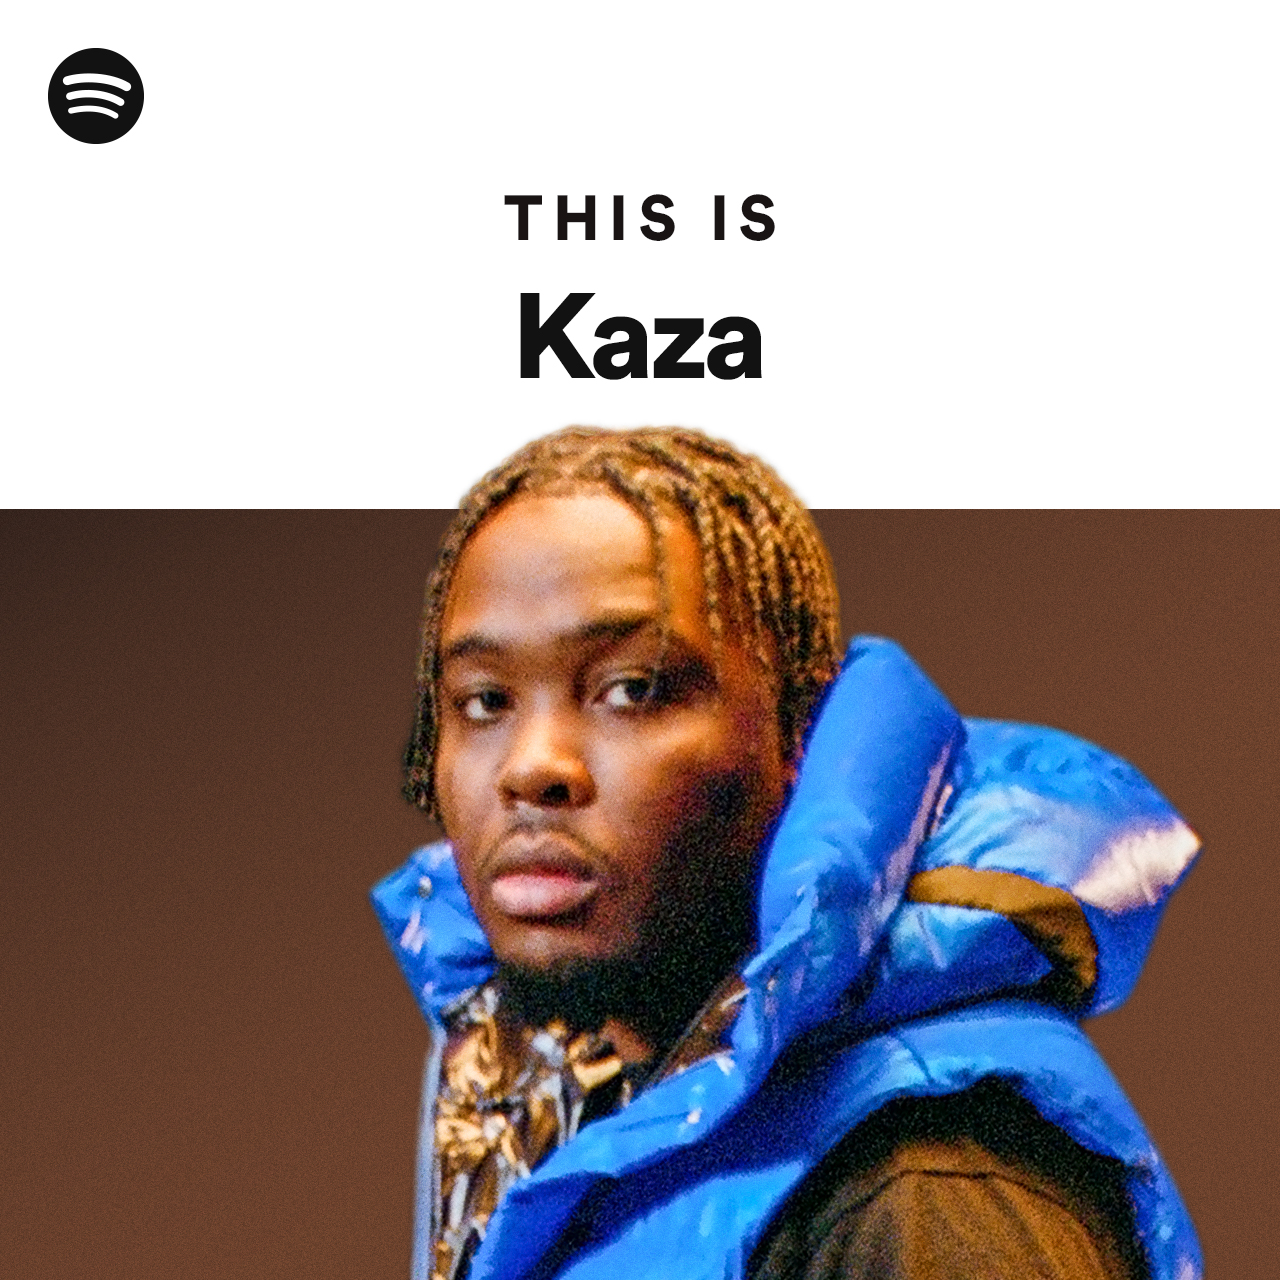 What is the most popular album by Kaza?